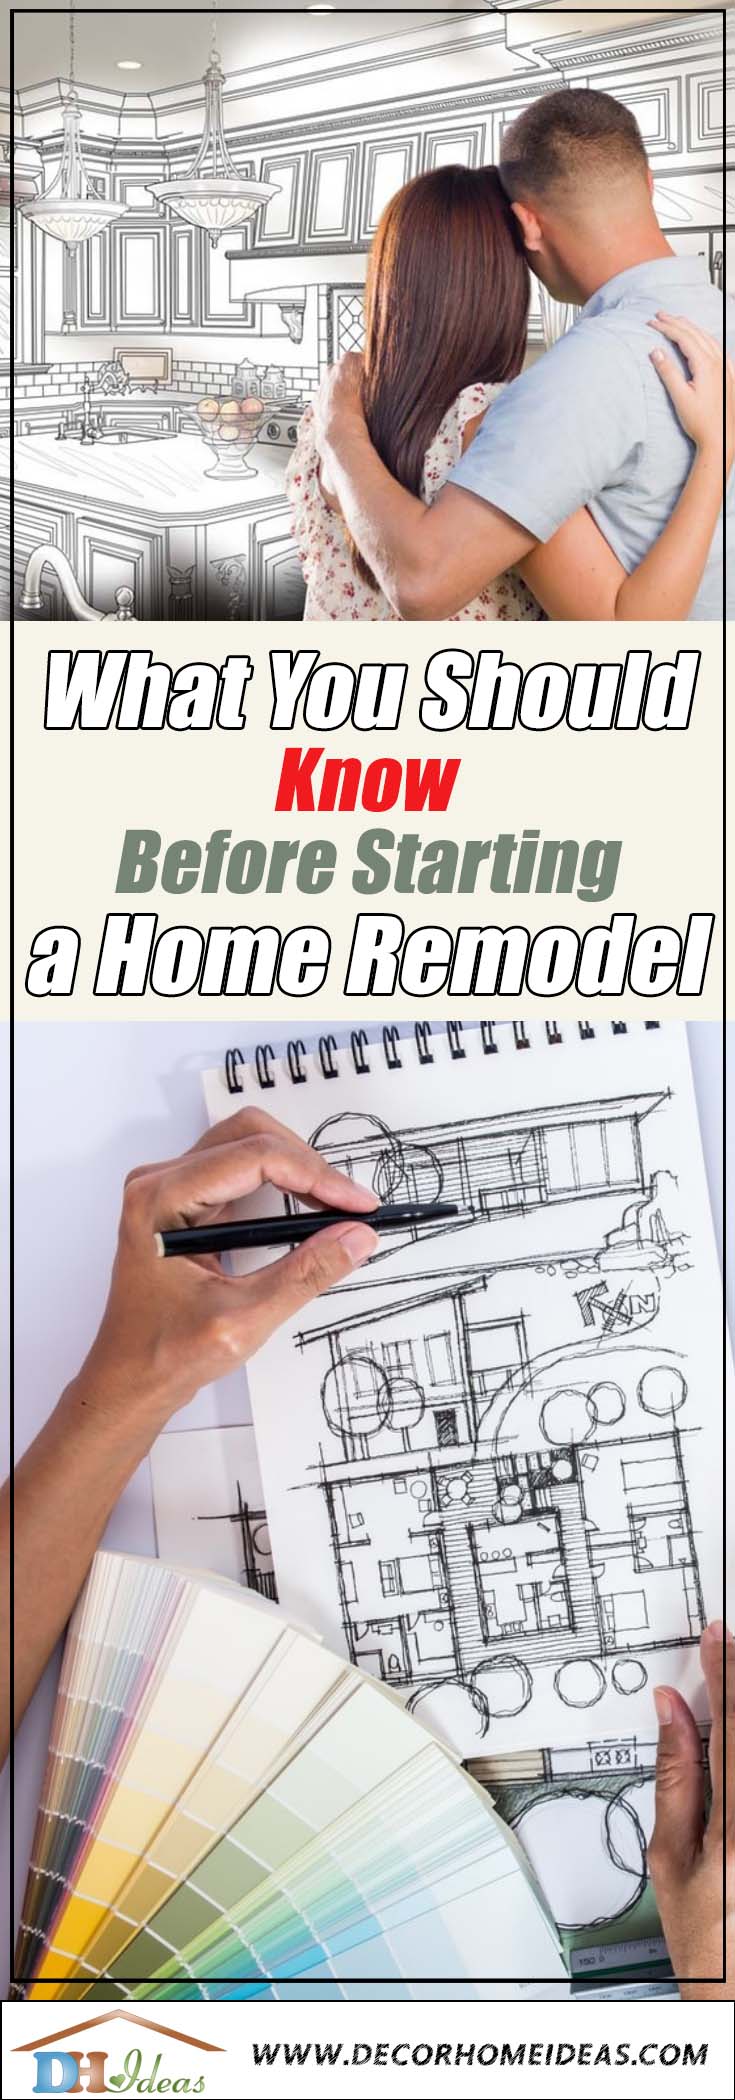 What You Should Know Before Starting a Home Remodel